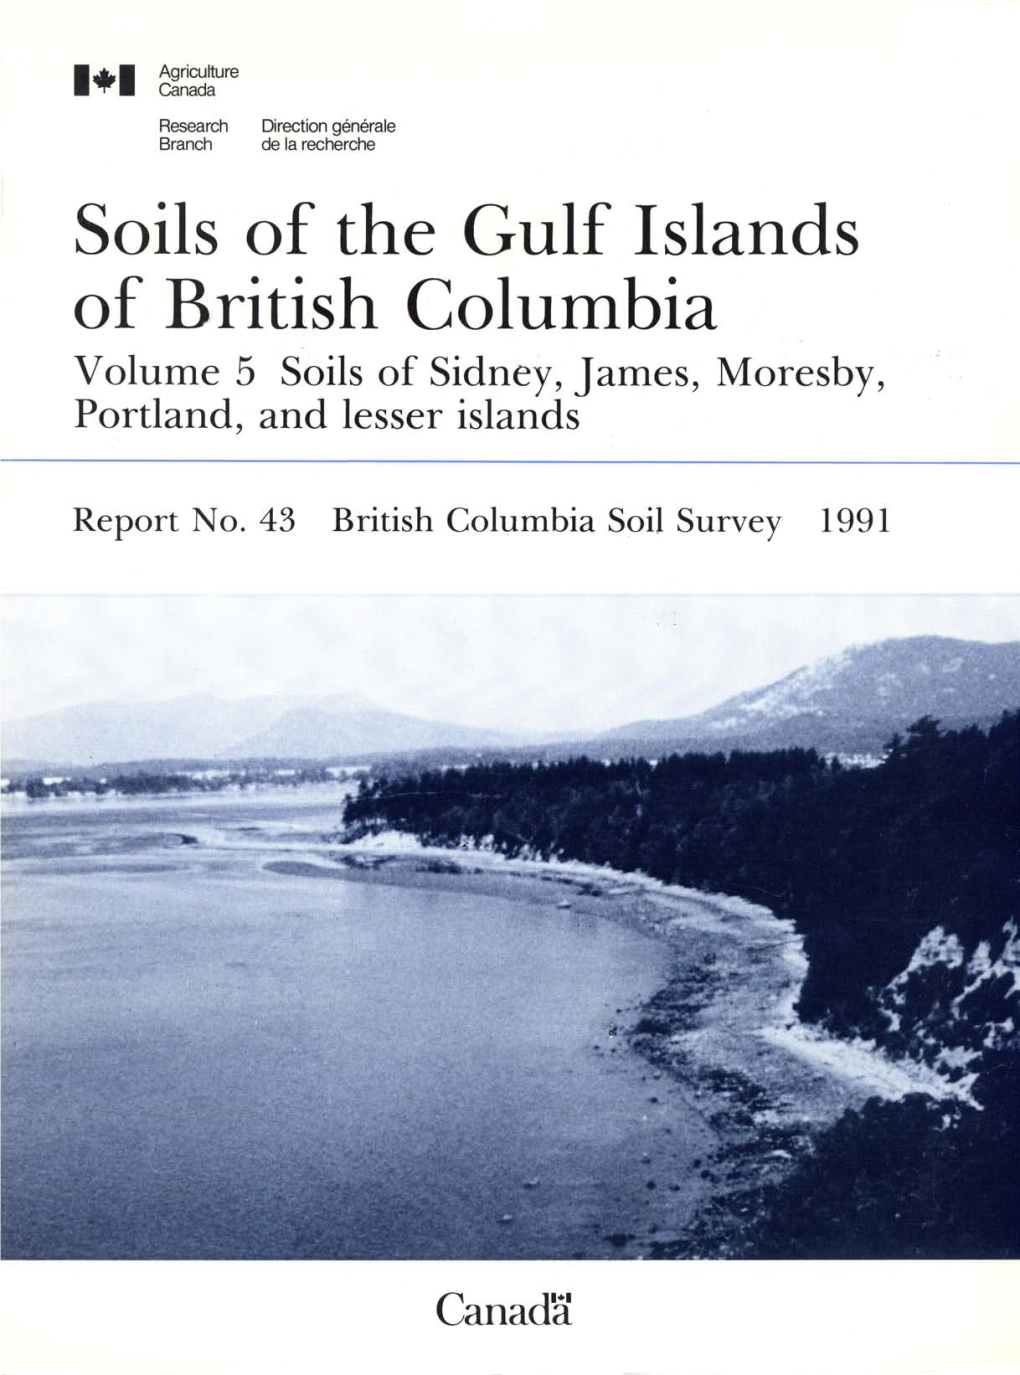 Soils of the Gulf Islands of British Columbia Volume 5 Soils of Sidney, James, Moresby, Portland, and Lesser Islands